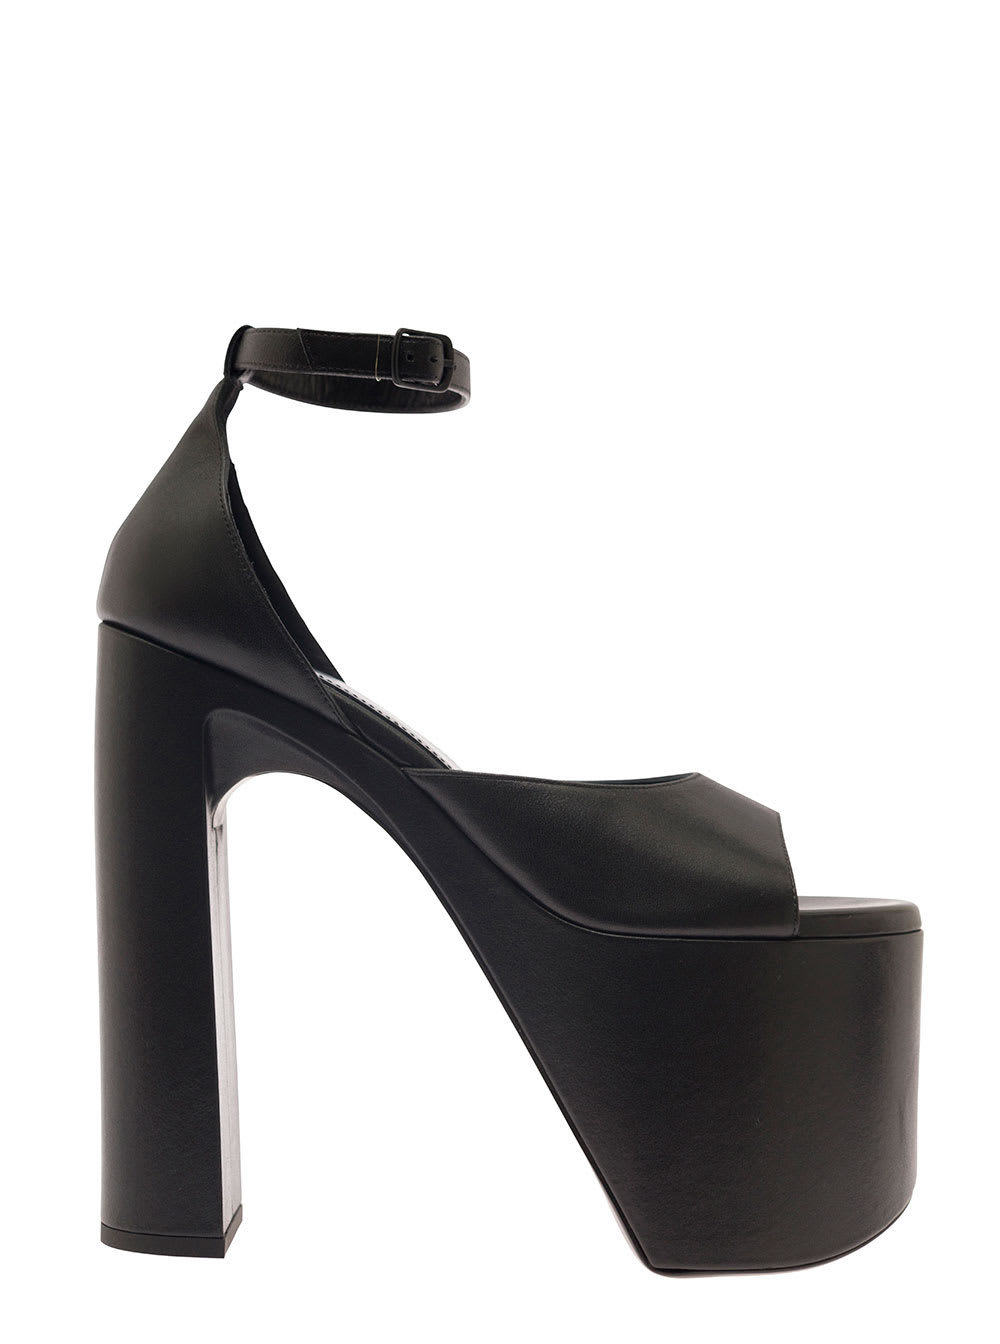 Balenciaga Camden Black Sandals With Oversized Platform In Smooth Leather Woman